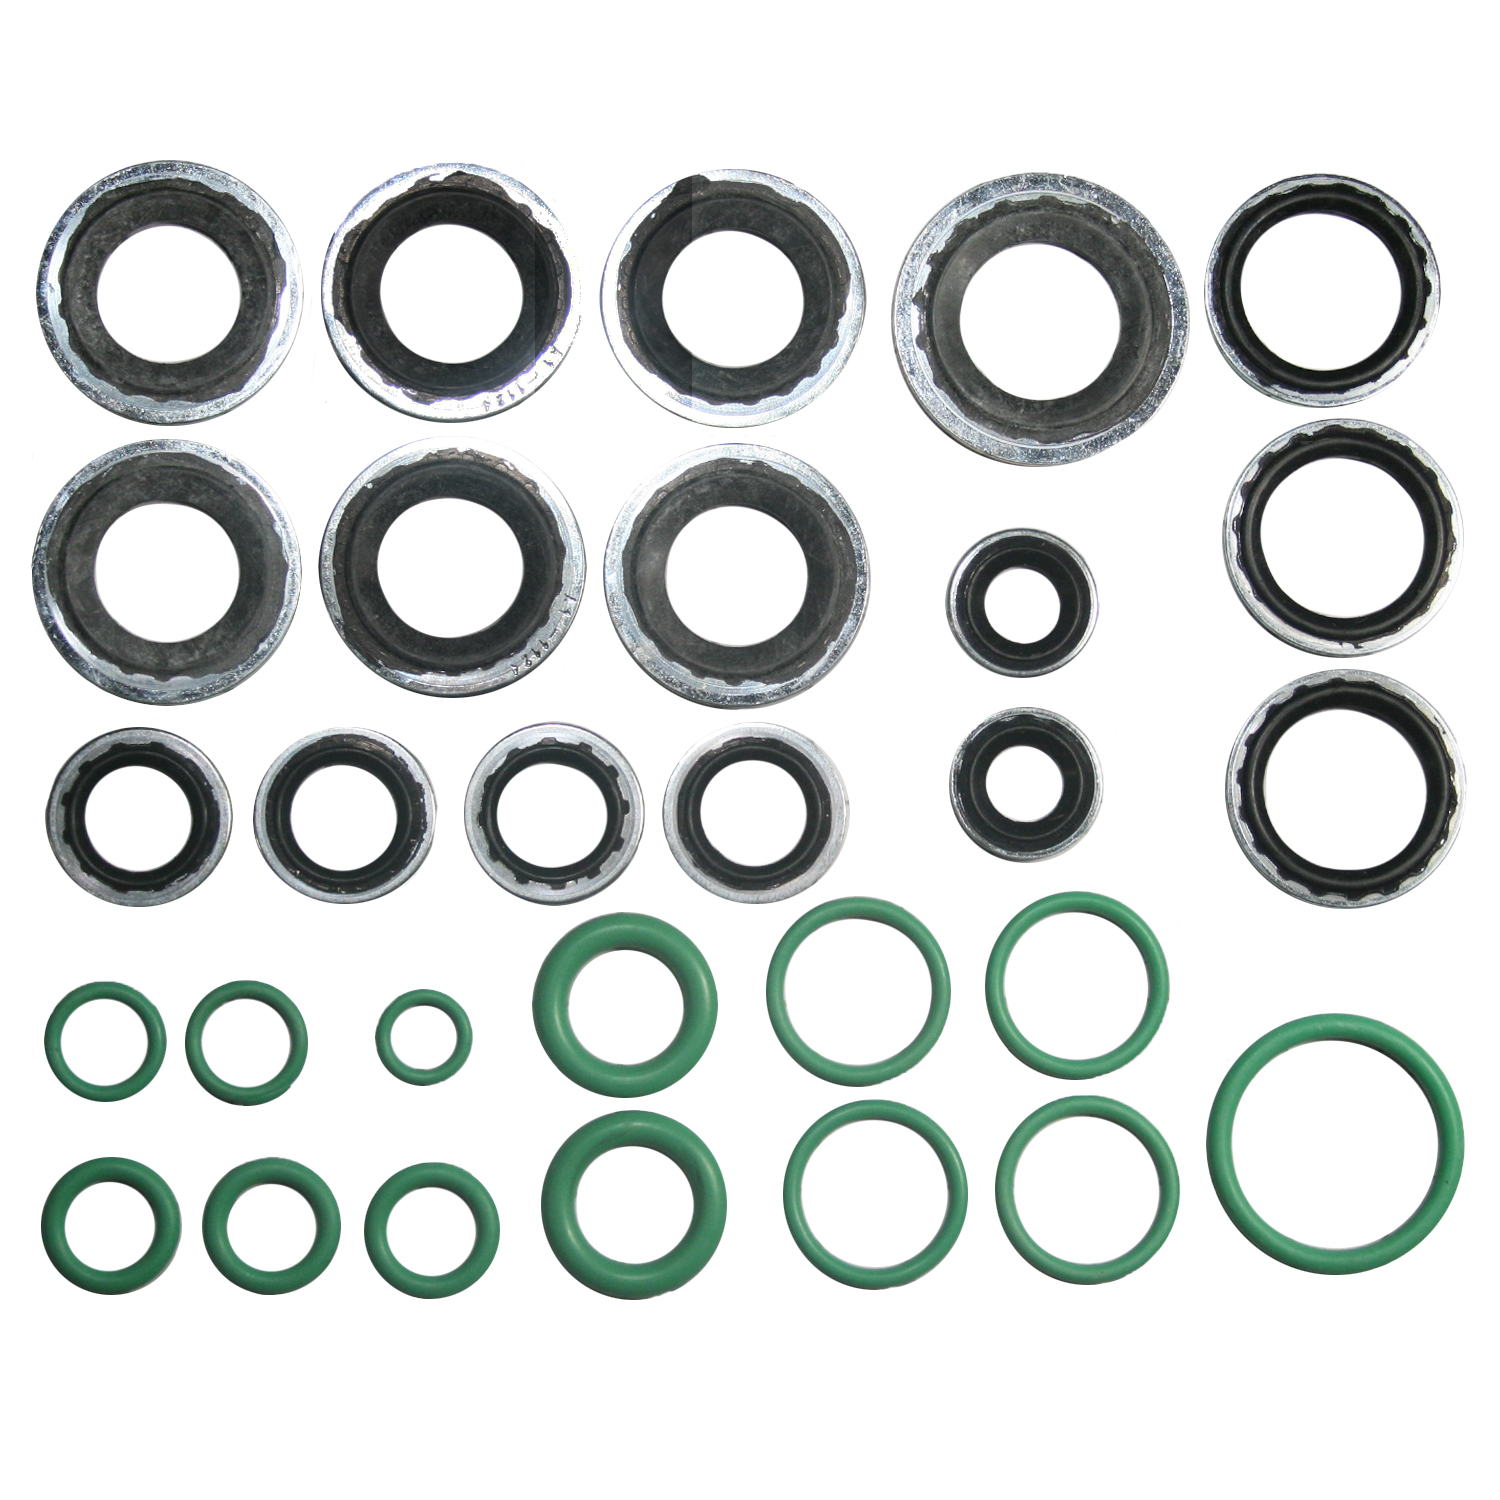 TCW O-Rings MT2548 New Product Image field_60b6a13a6e67c